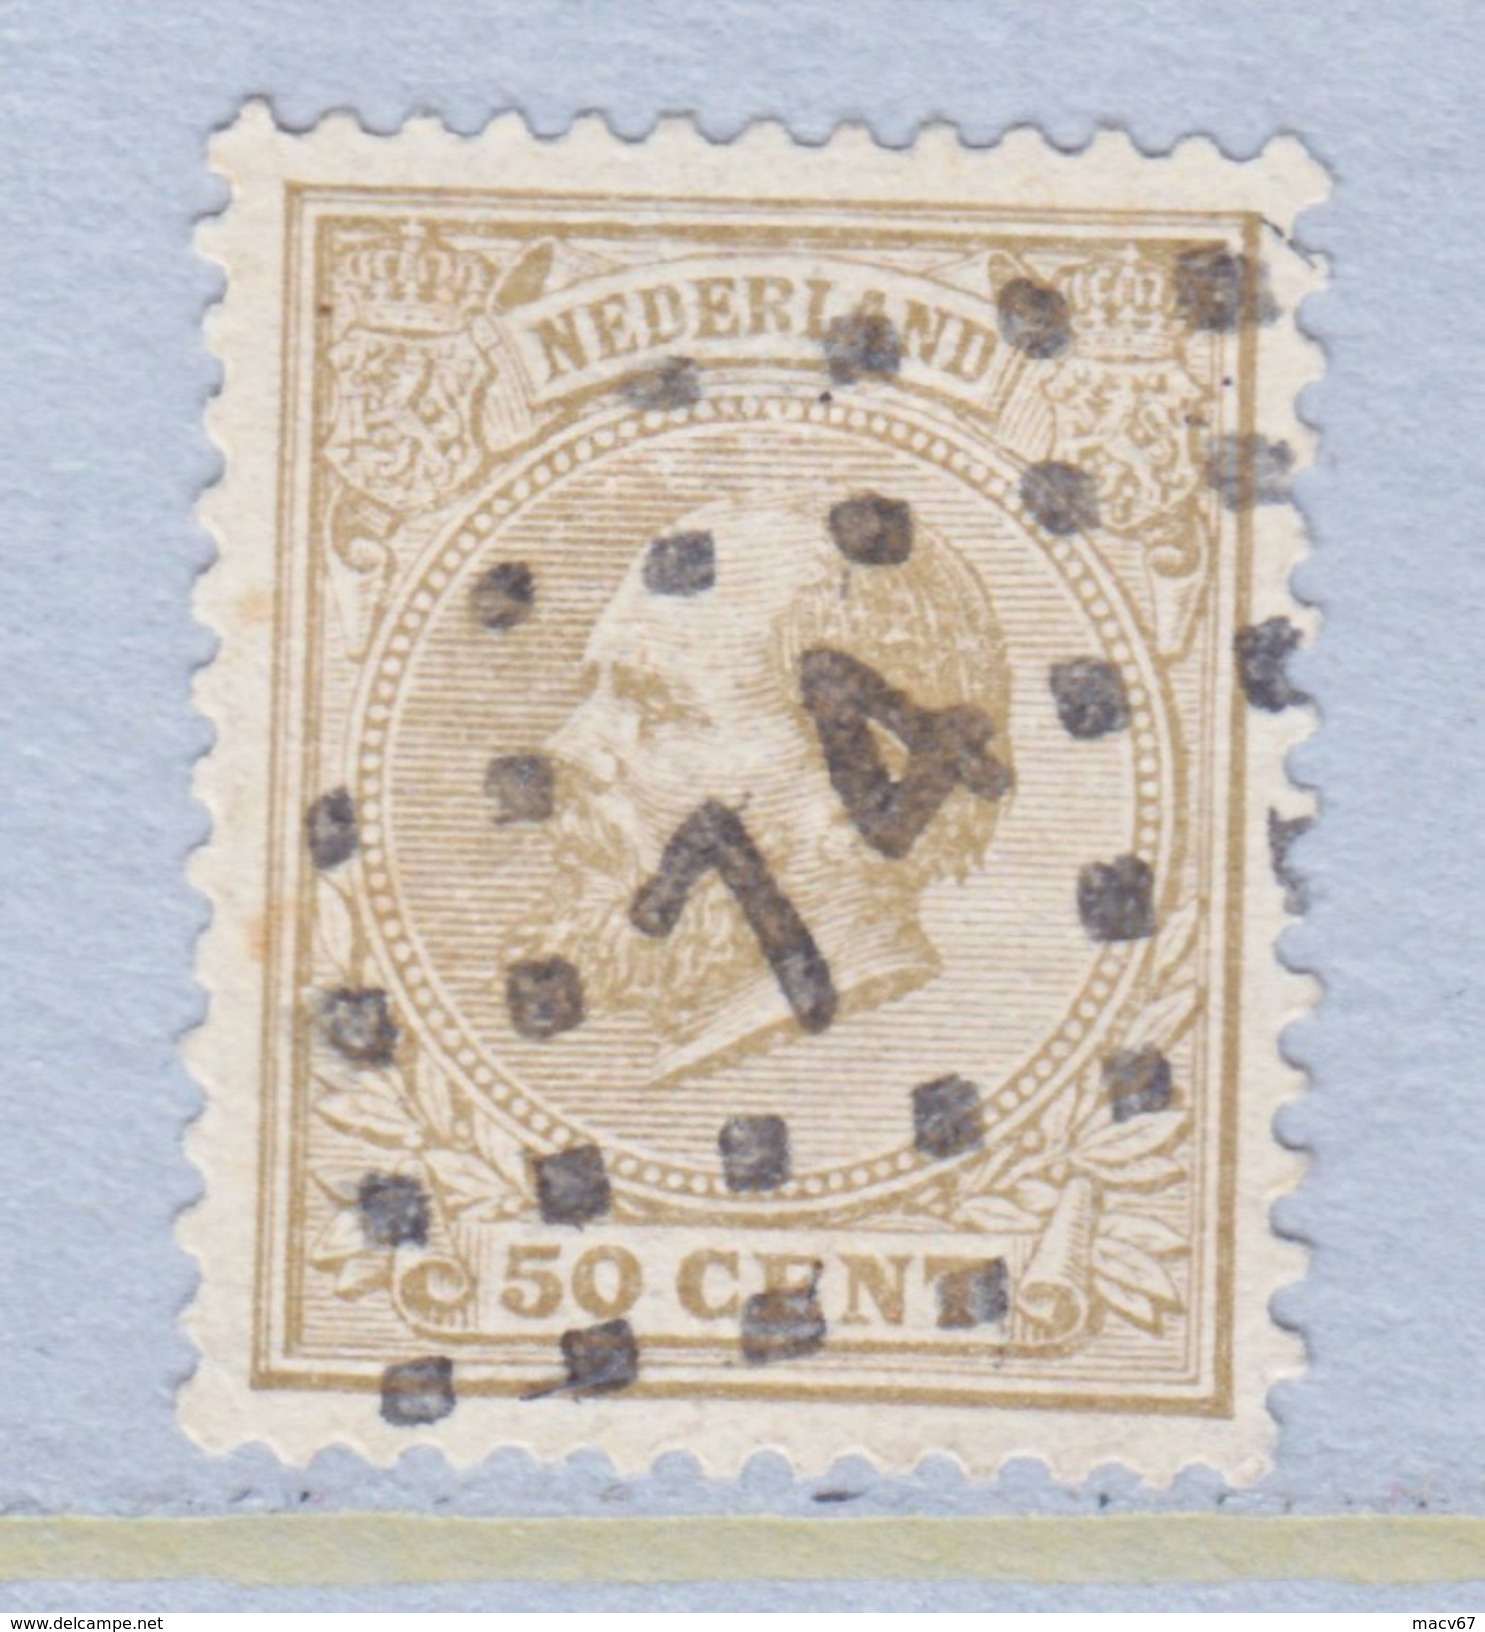 NETHERLANDS  31  (o) - Used Stamps